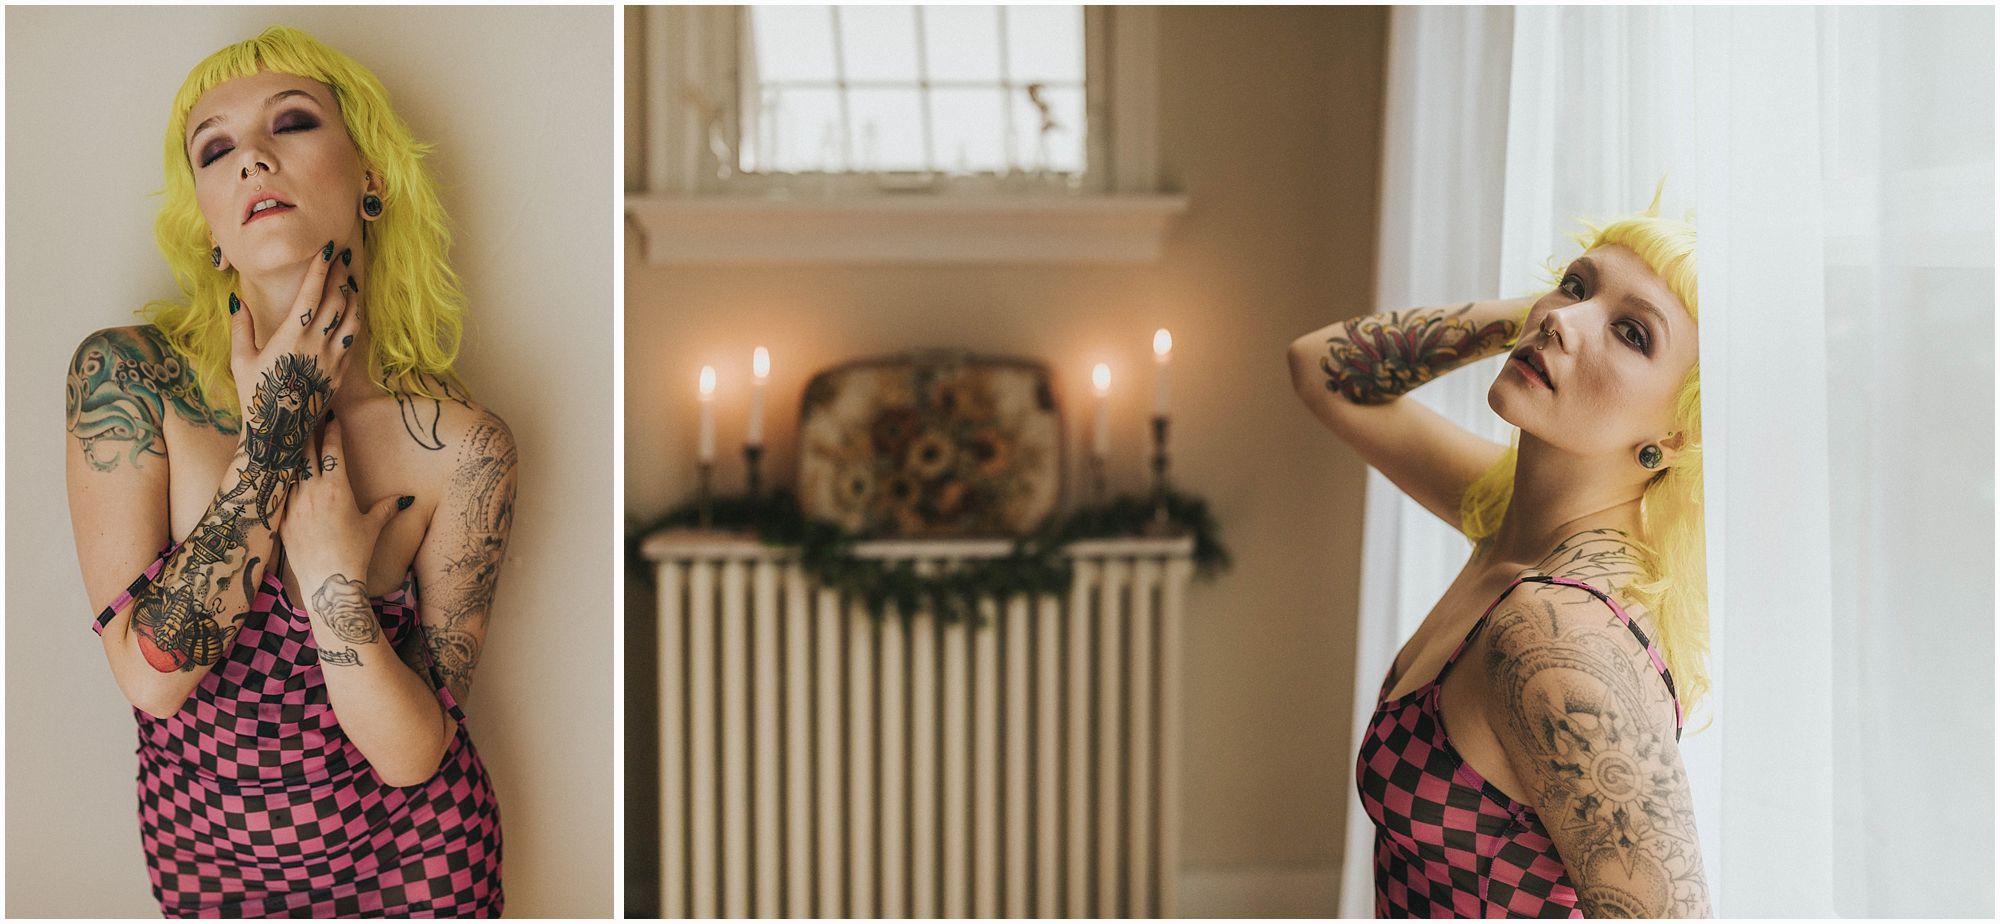 vancouver boudoir photographer photographs beautiful edgy model posing with pink and black checkered dress